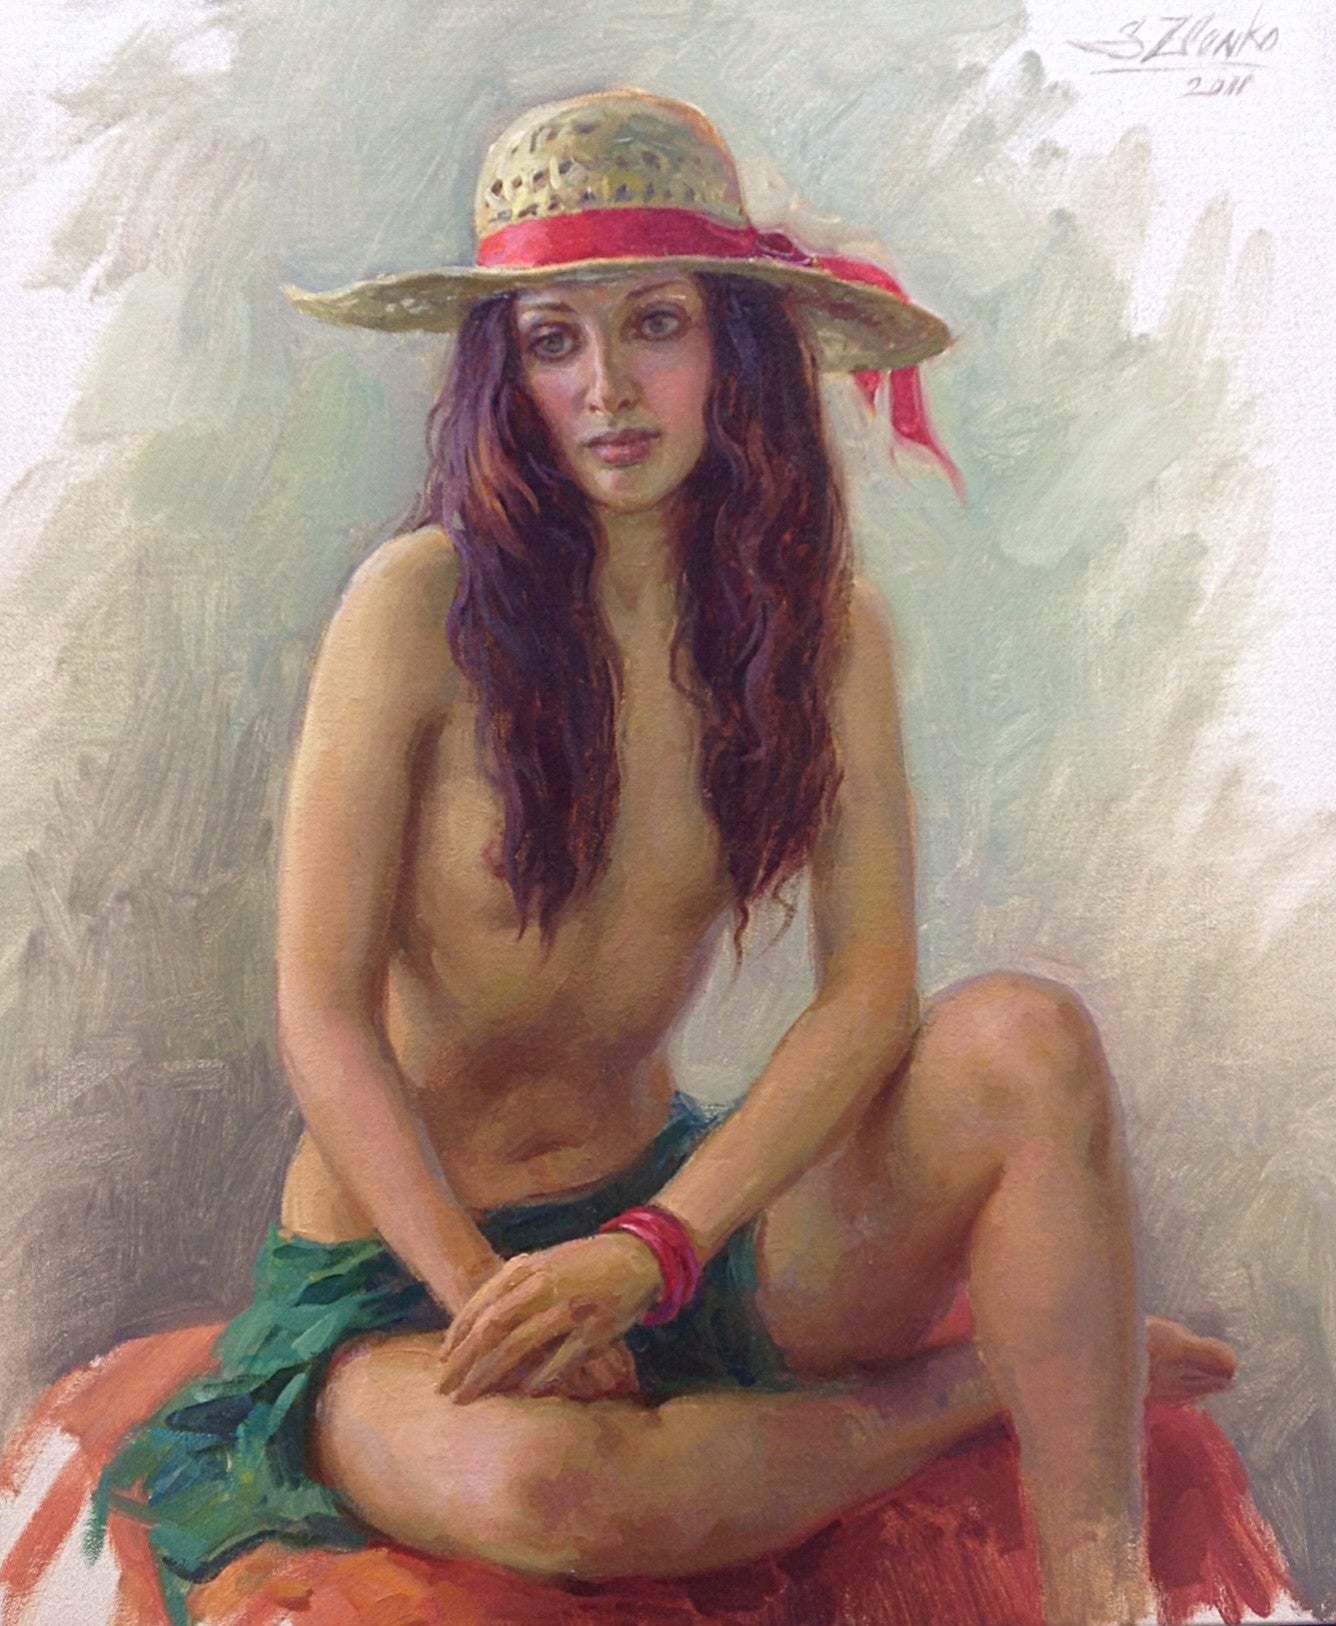 The Girl With The Straw Hat - Green Gallery